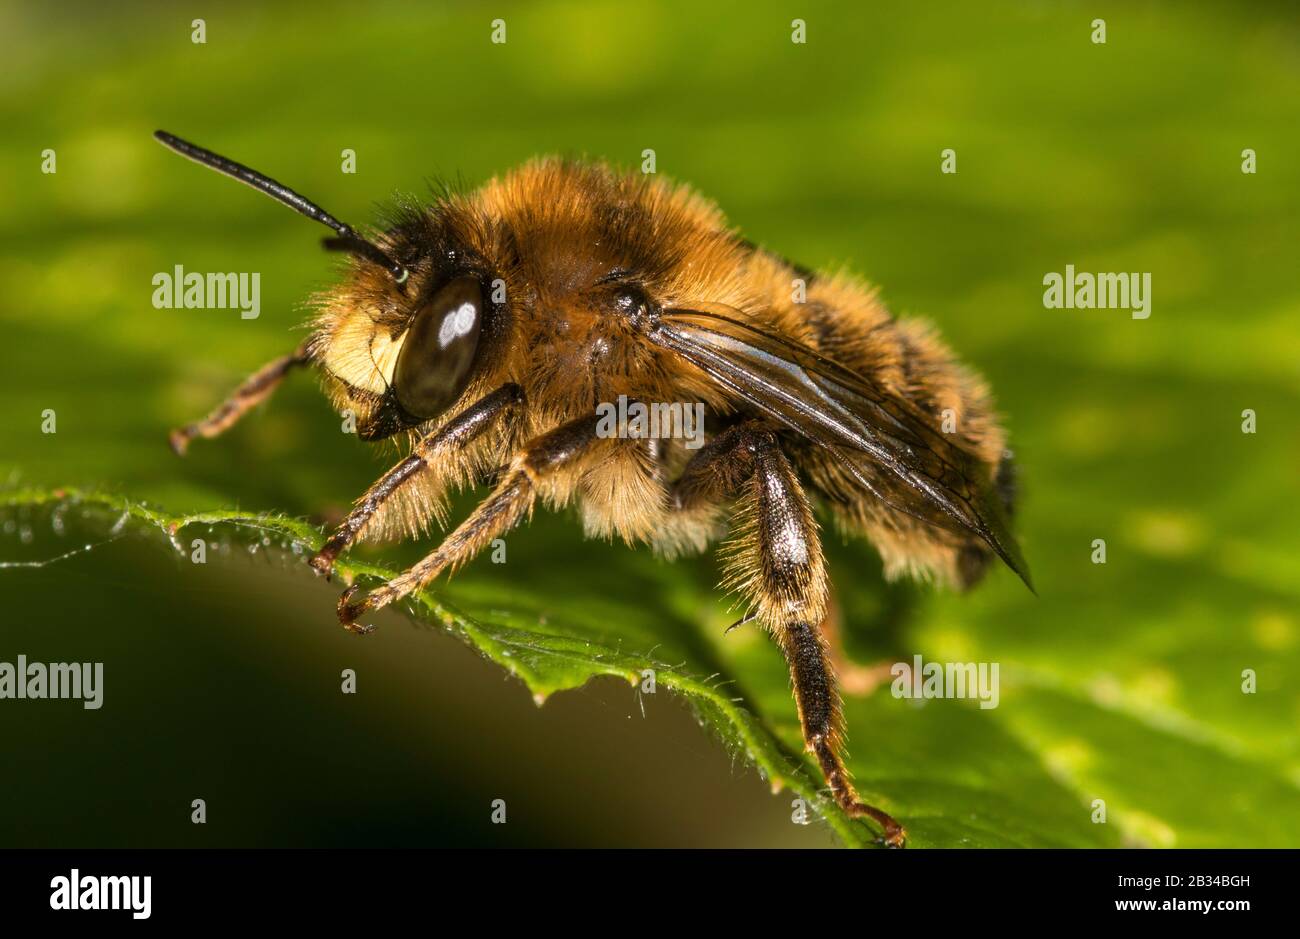 Fork-tailed Flower-Bee (Anthophora furcata), on a leaf, Germany Stock Photo